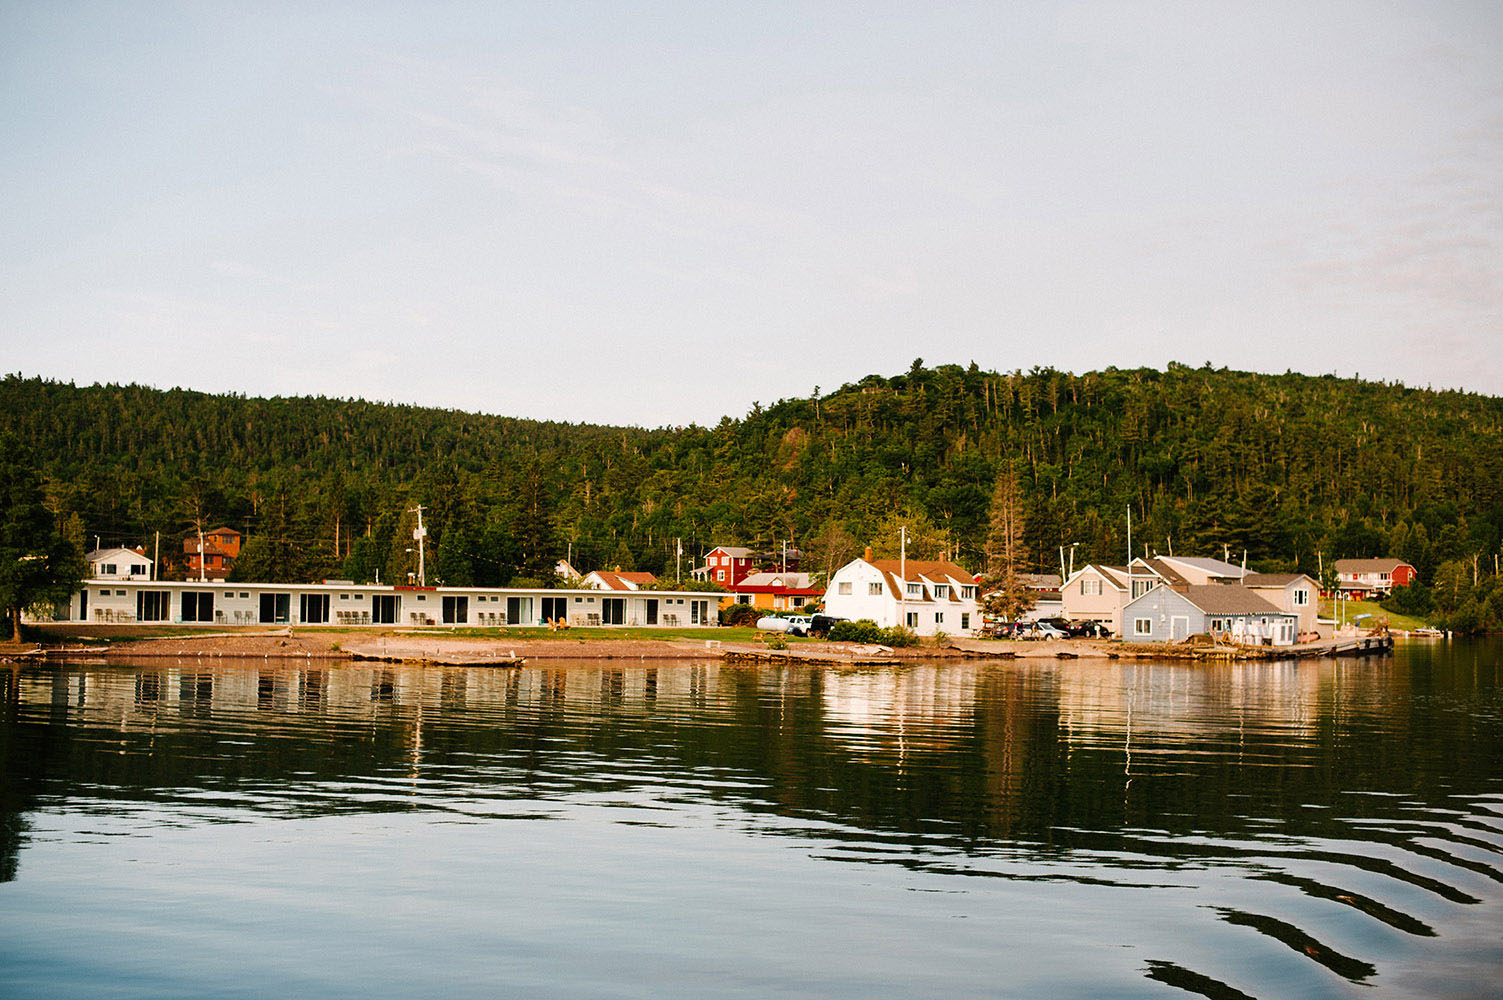 View of Copper Harbor Michigan from a boat